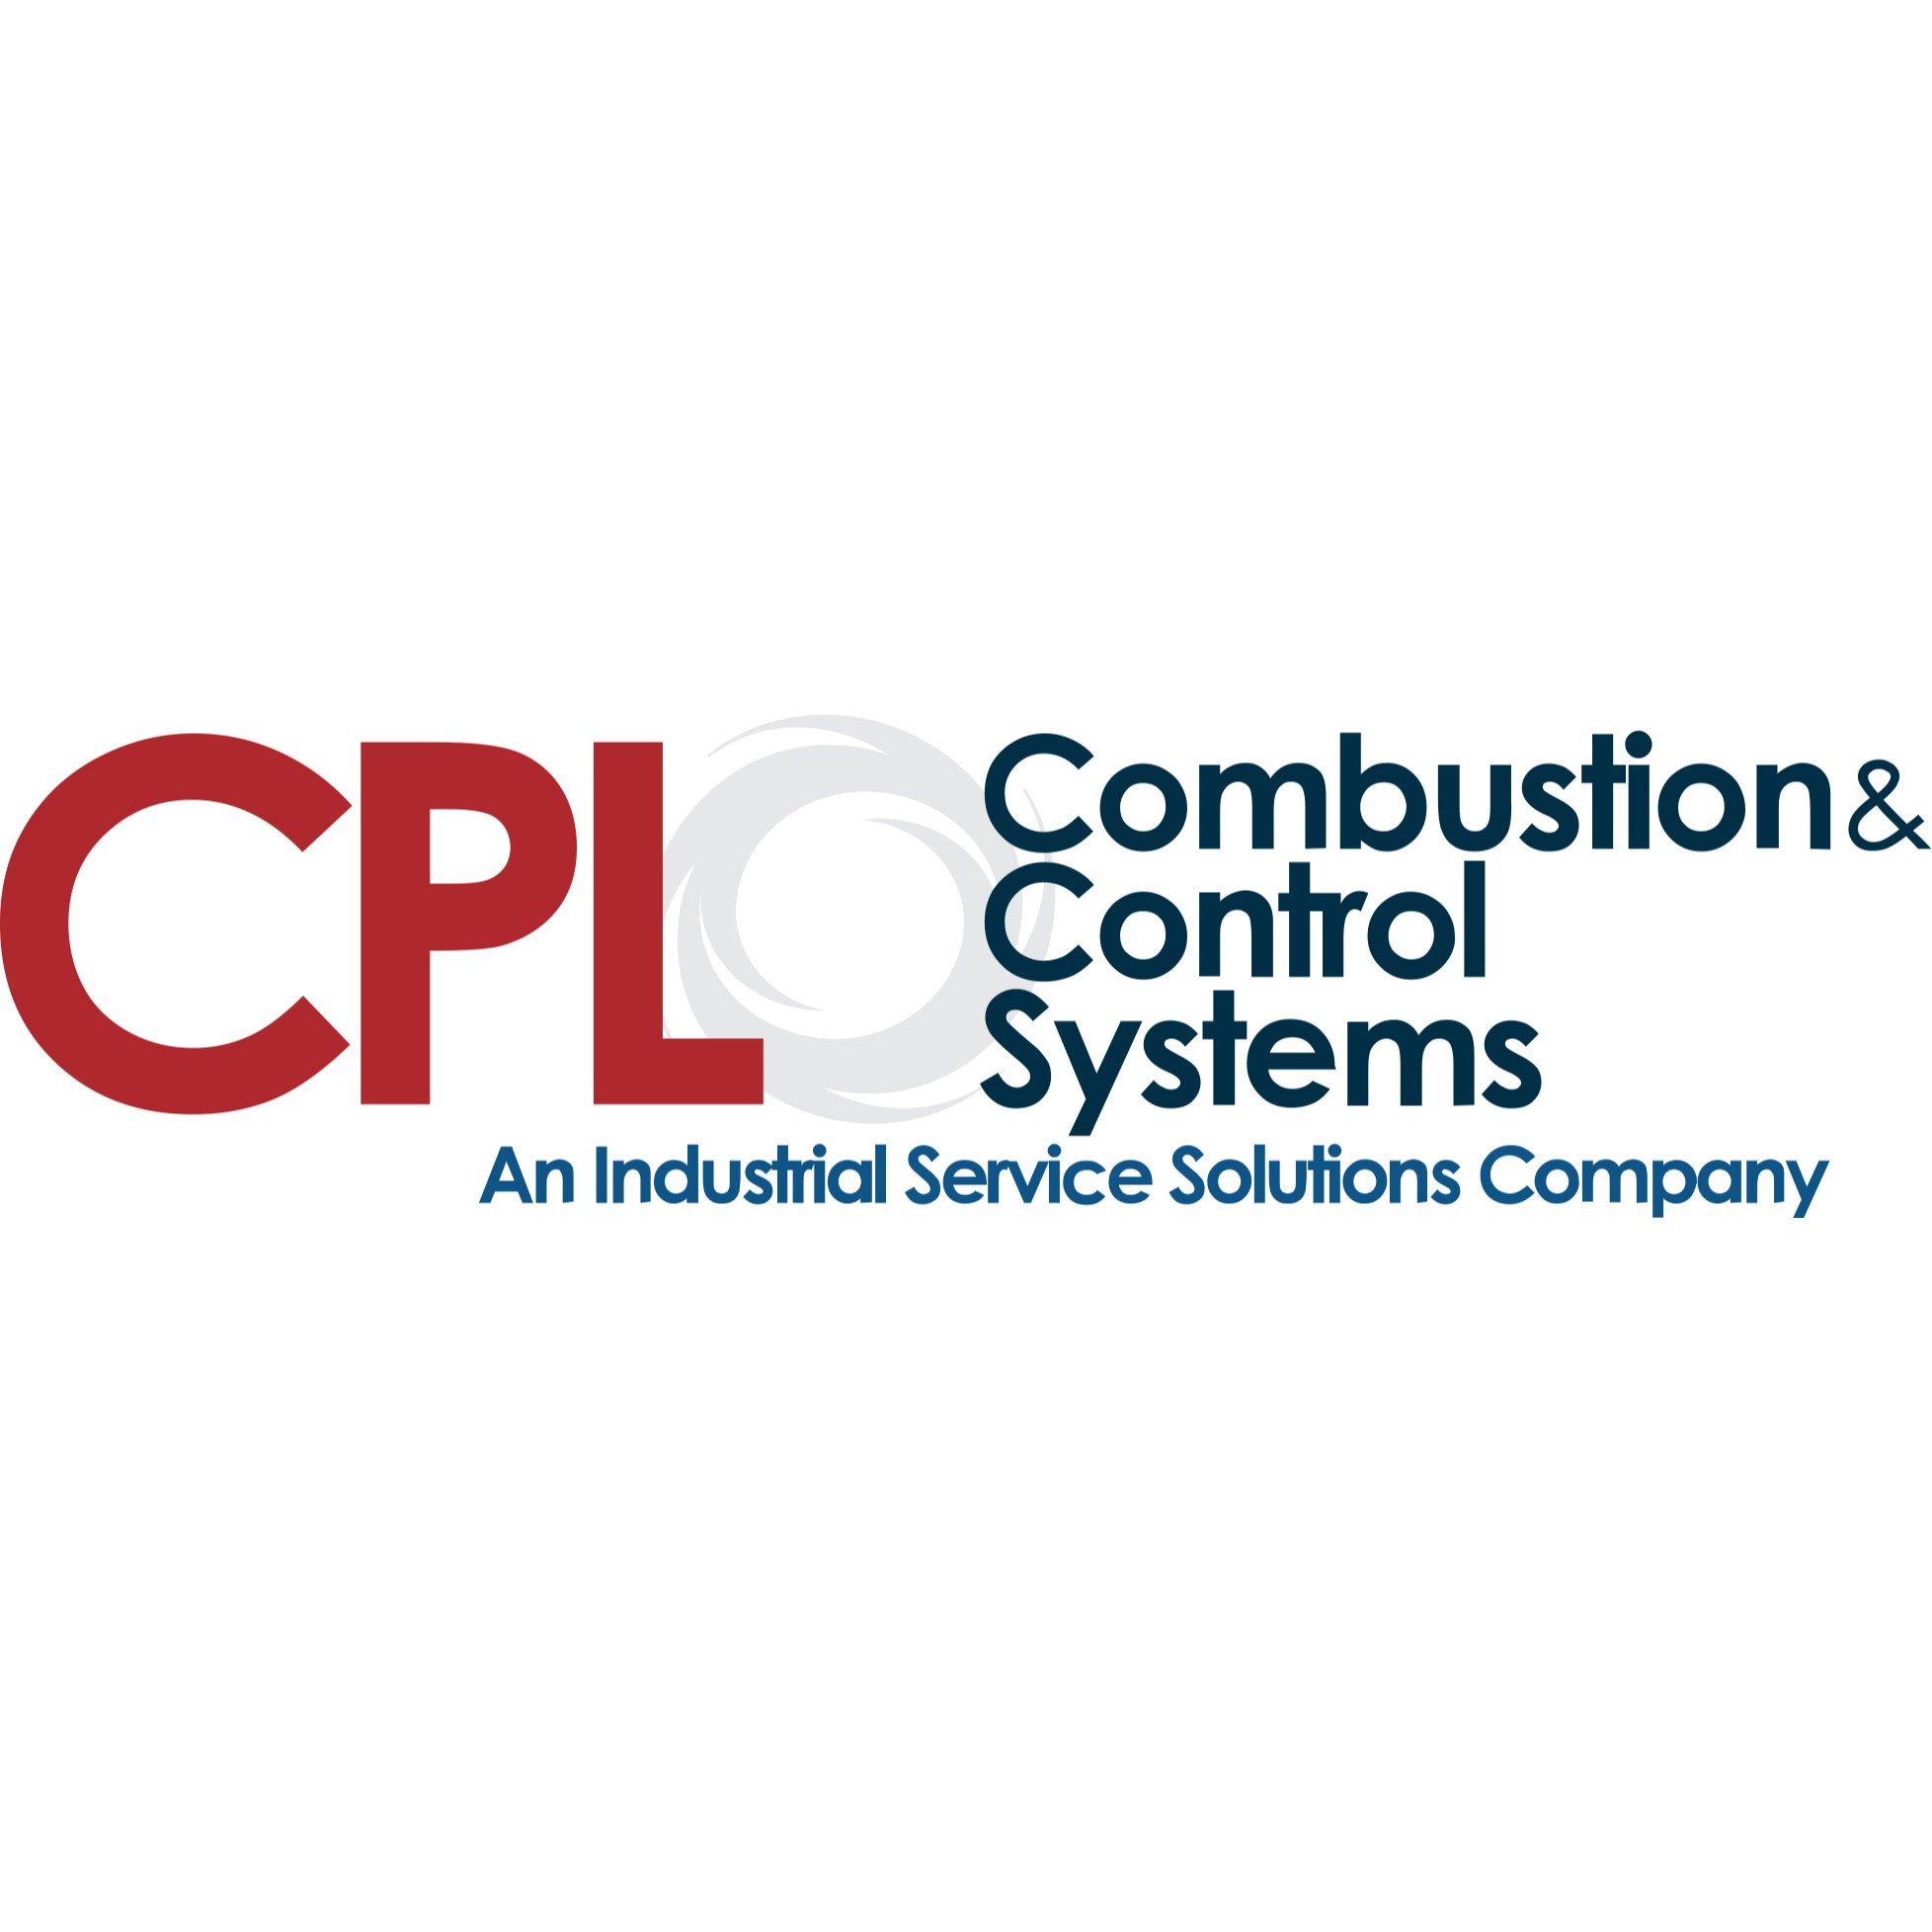 CPL Systems